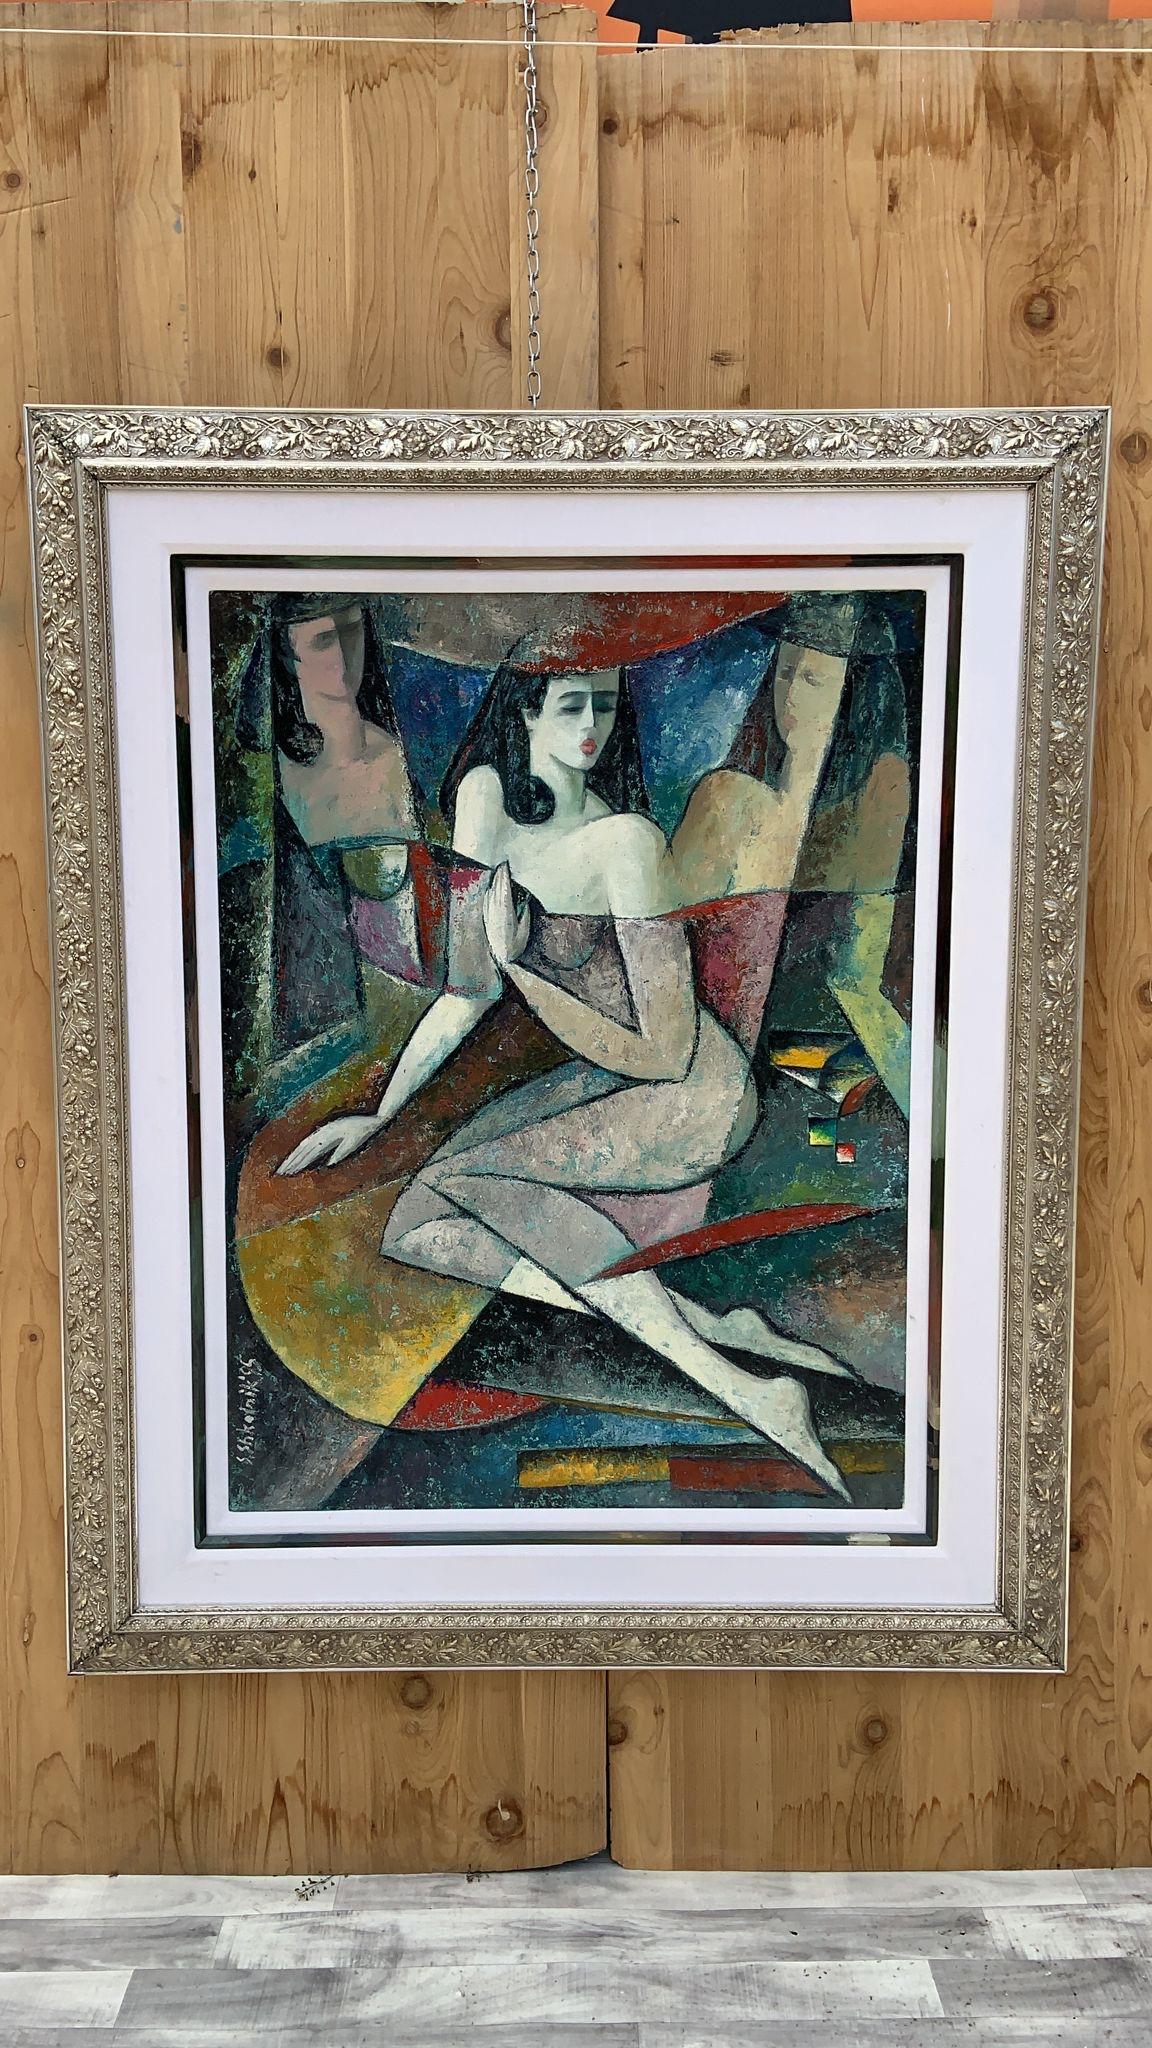 Vintage Art Deco Framed Oil on Canvas Painting Wall Art Wall Decor 

Cool large Art Deco painting in a silver frame. 

Signed  

Circa 1995

Dimensions: 
H 64”
W 52”
D 1”